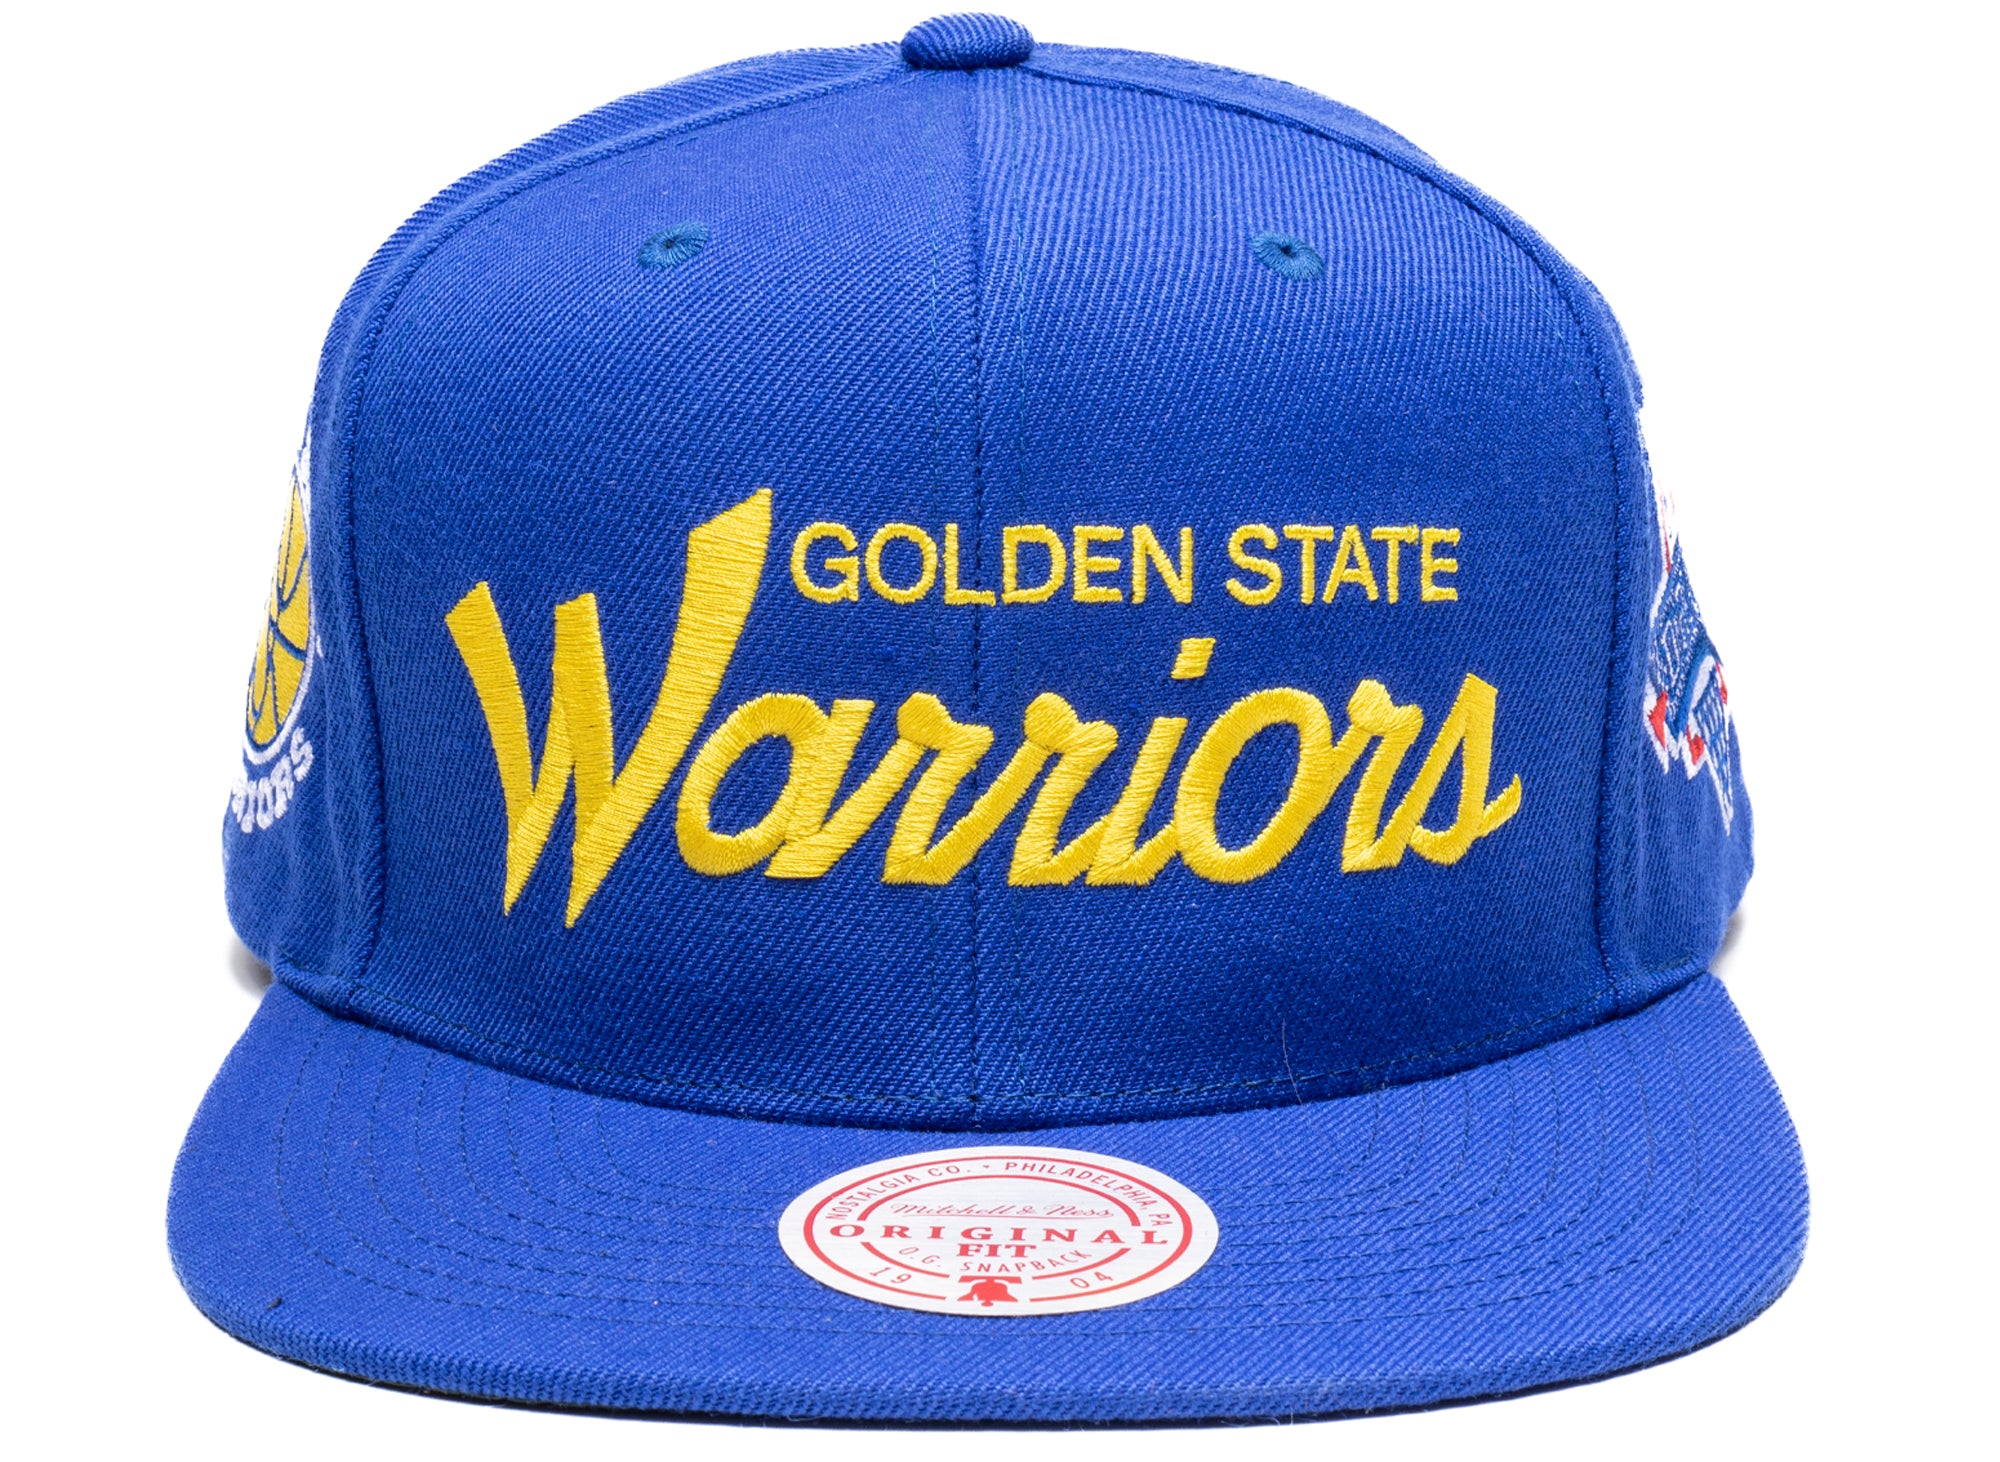 golden state warriors hat mitchell and ness